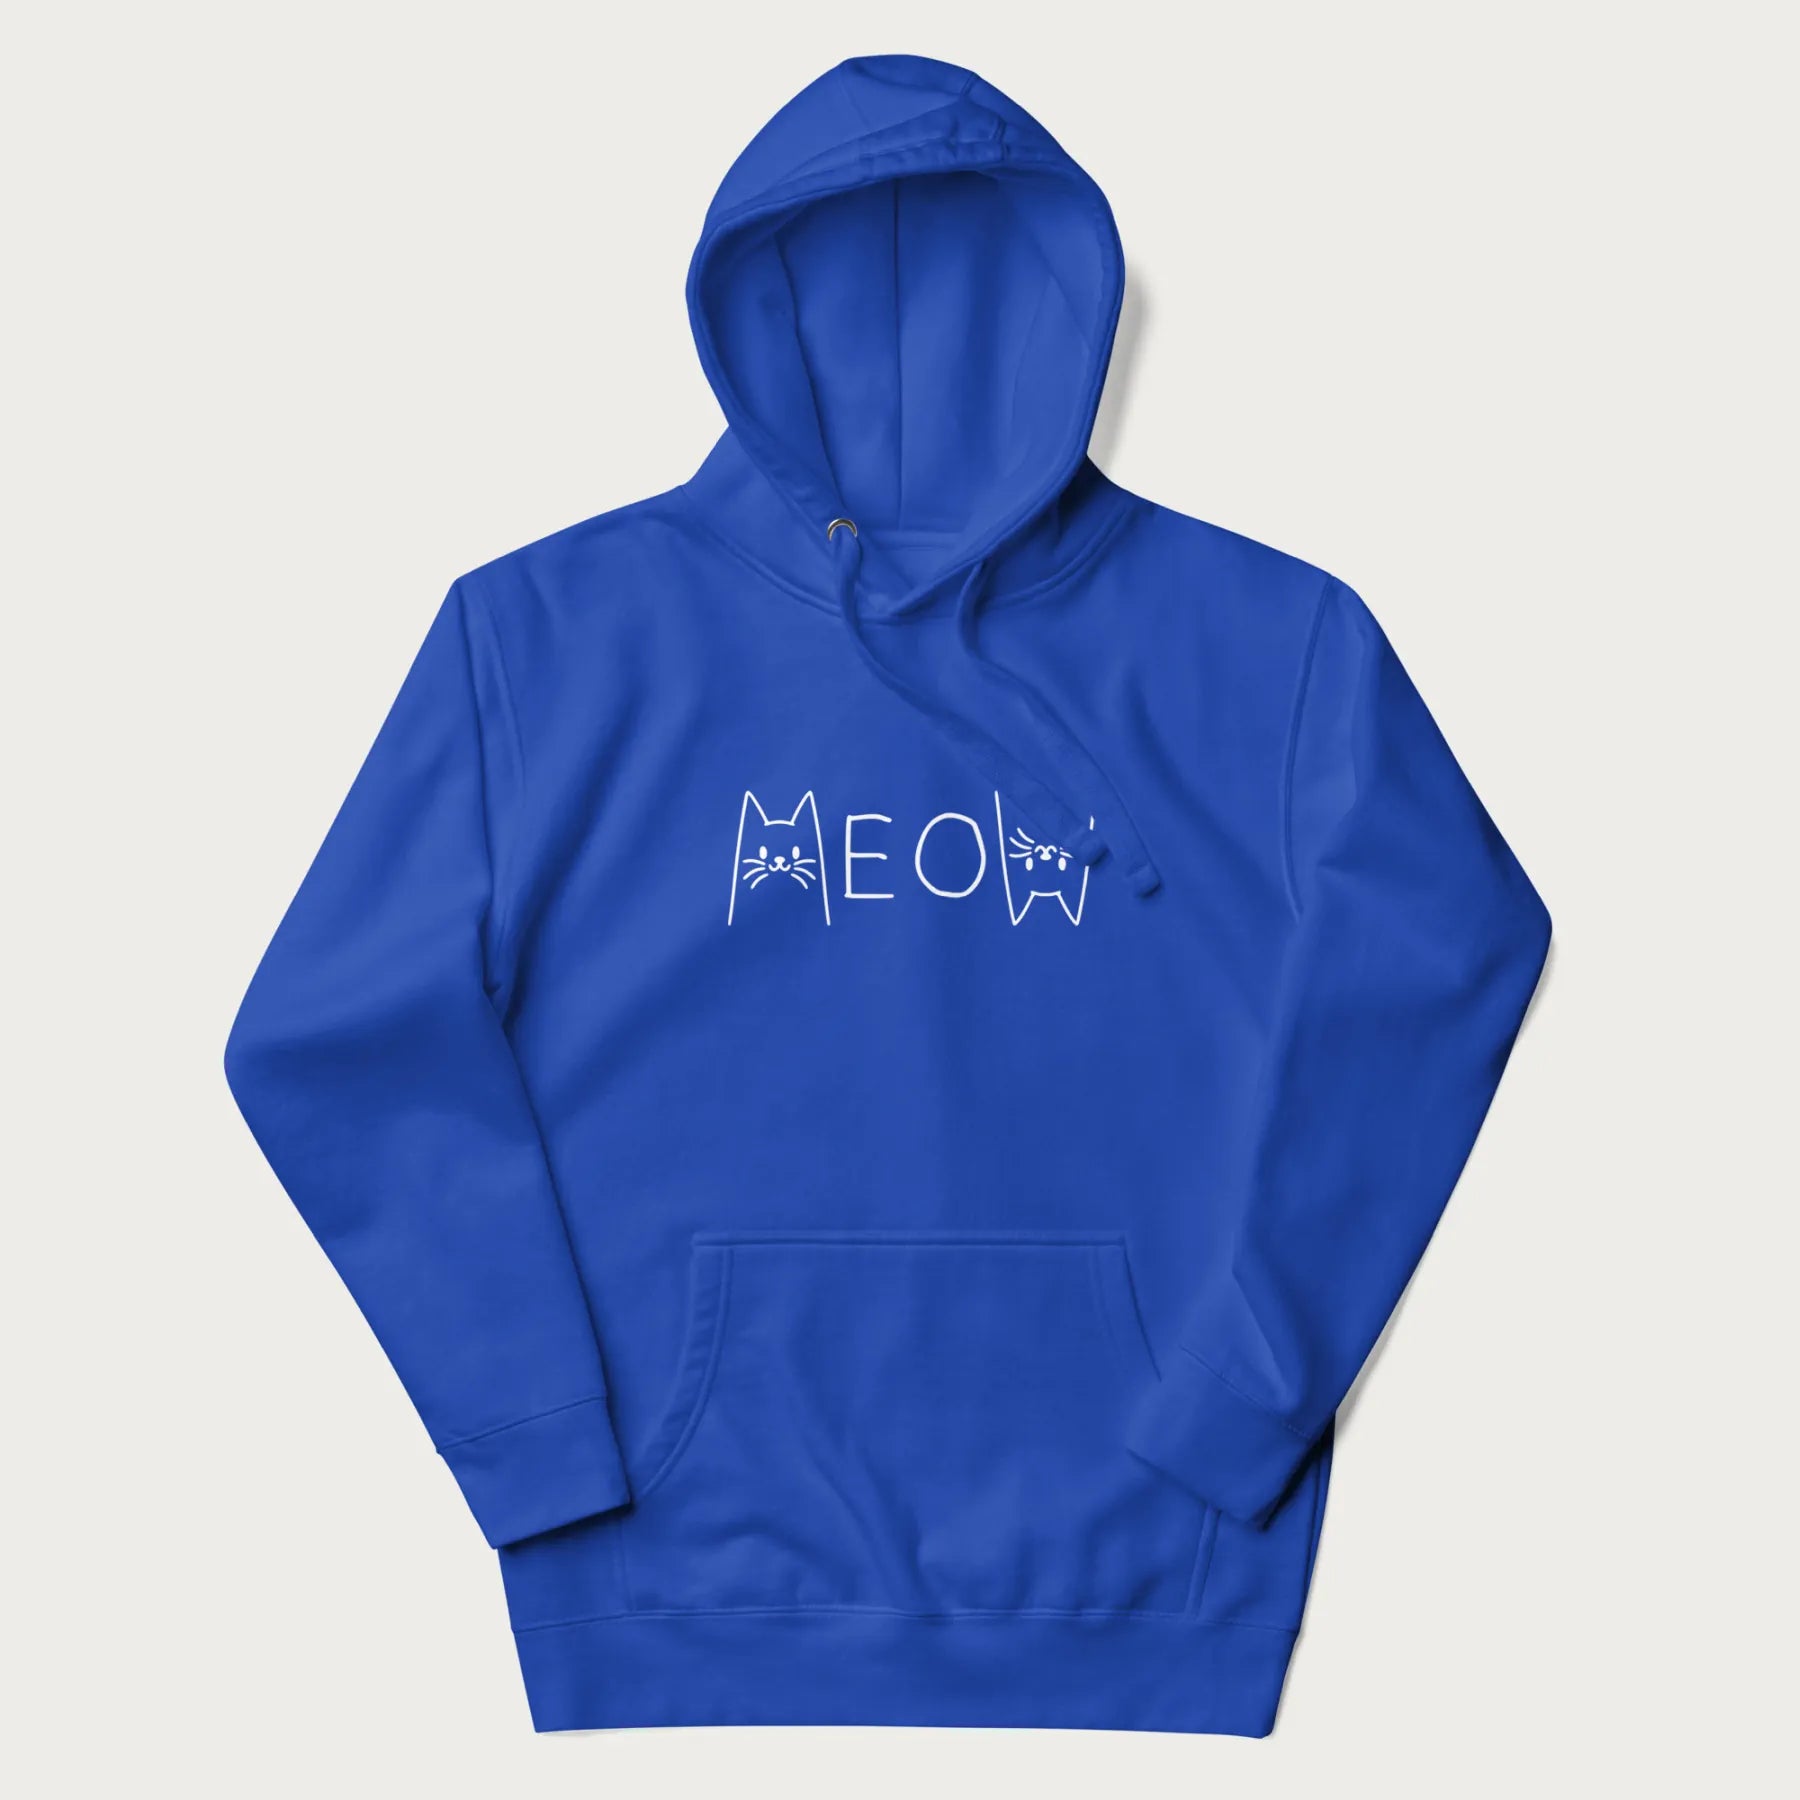 Royal blue meow hoodie with a simple 'MEOW' text and cute cat face graphics on the front.